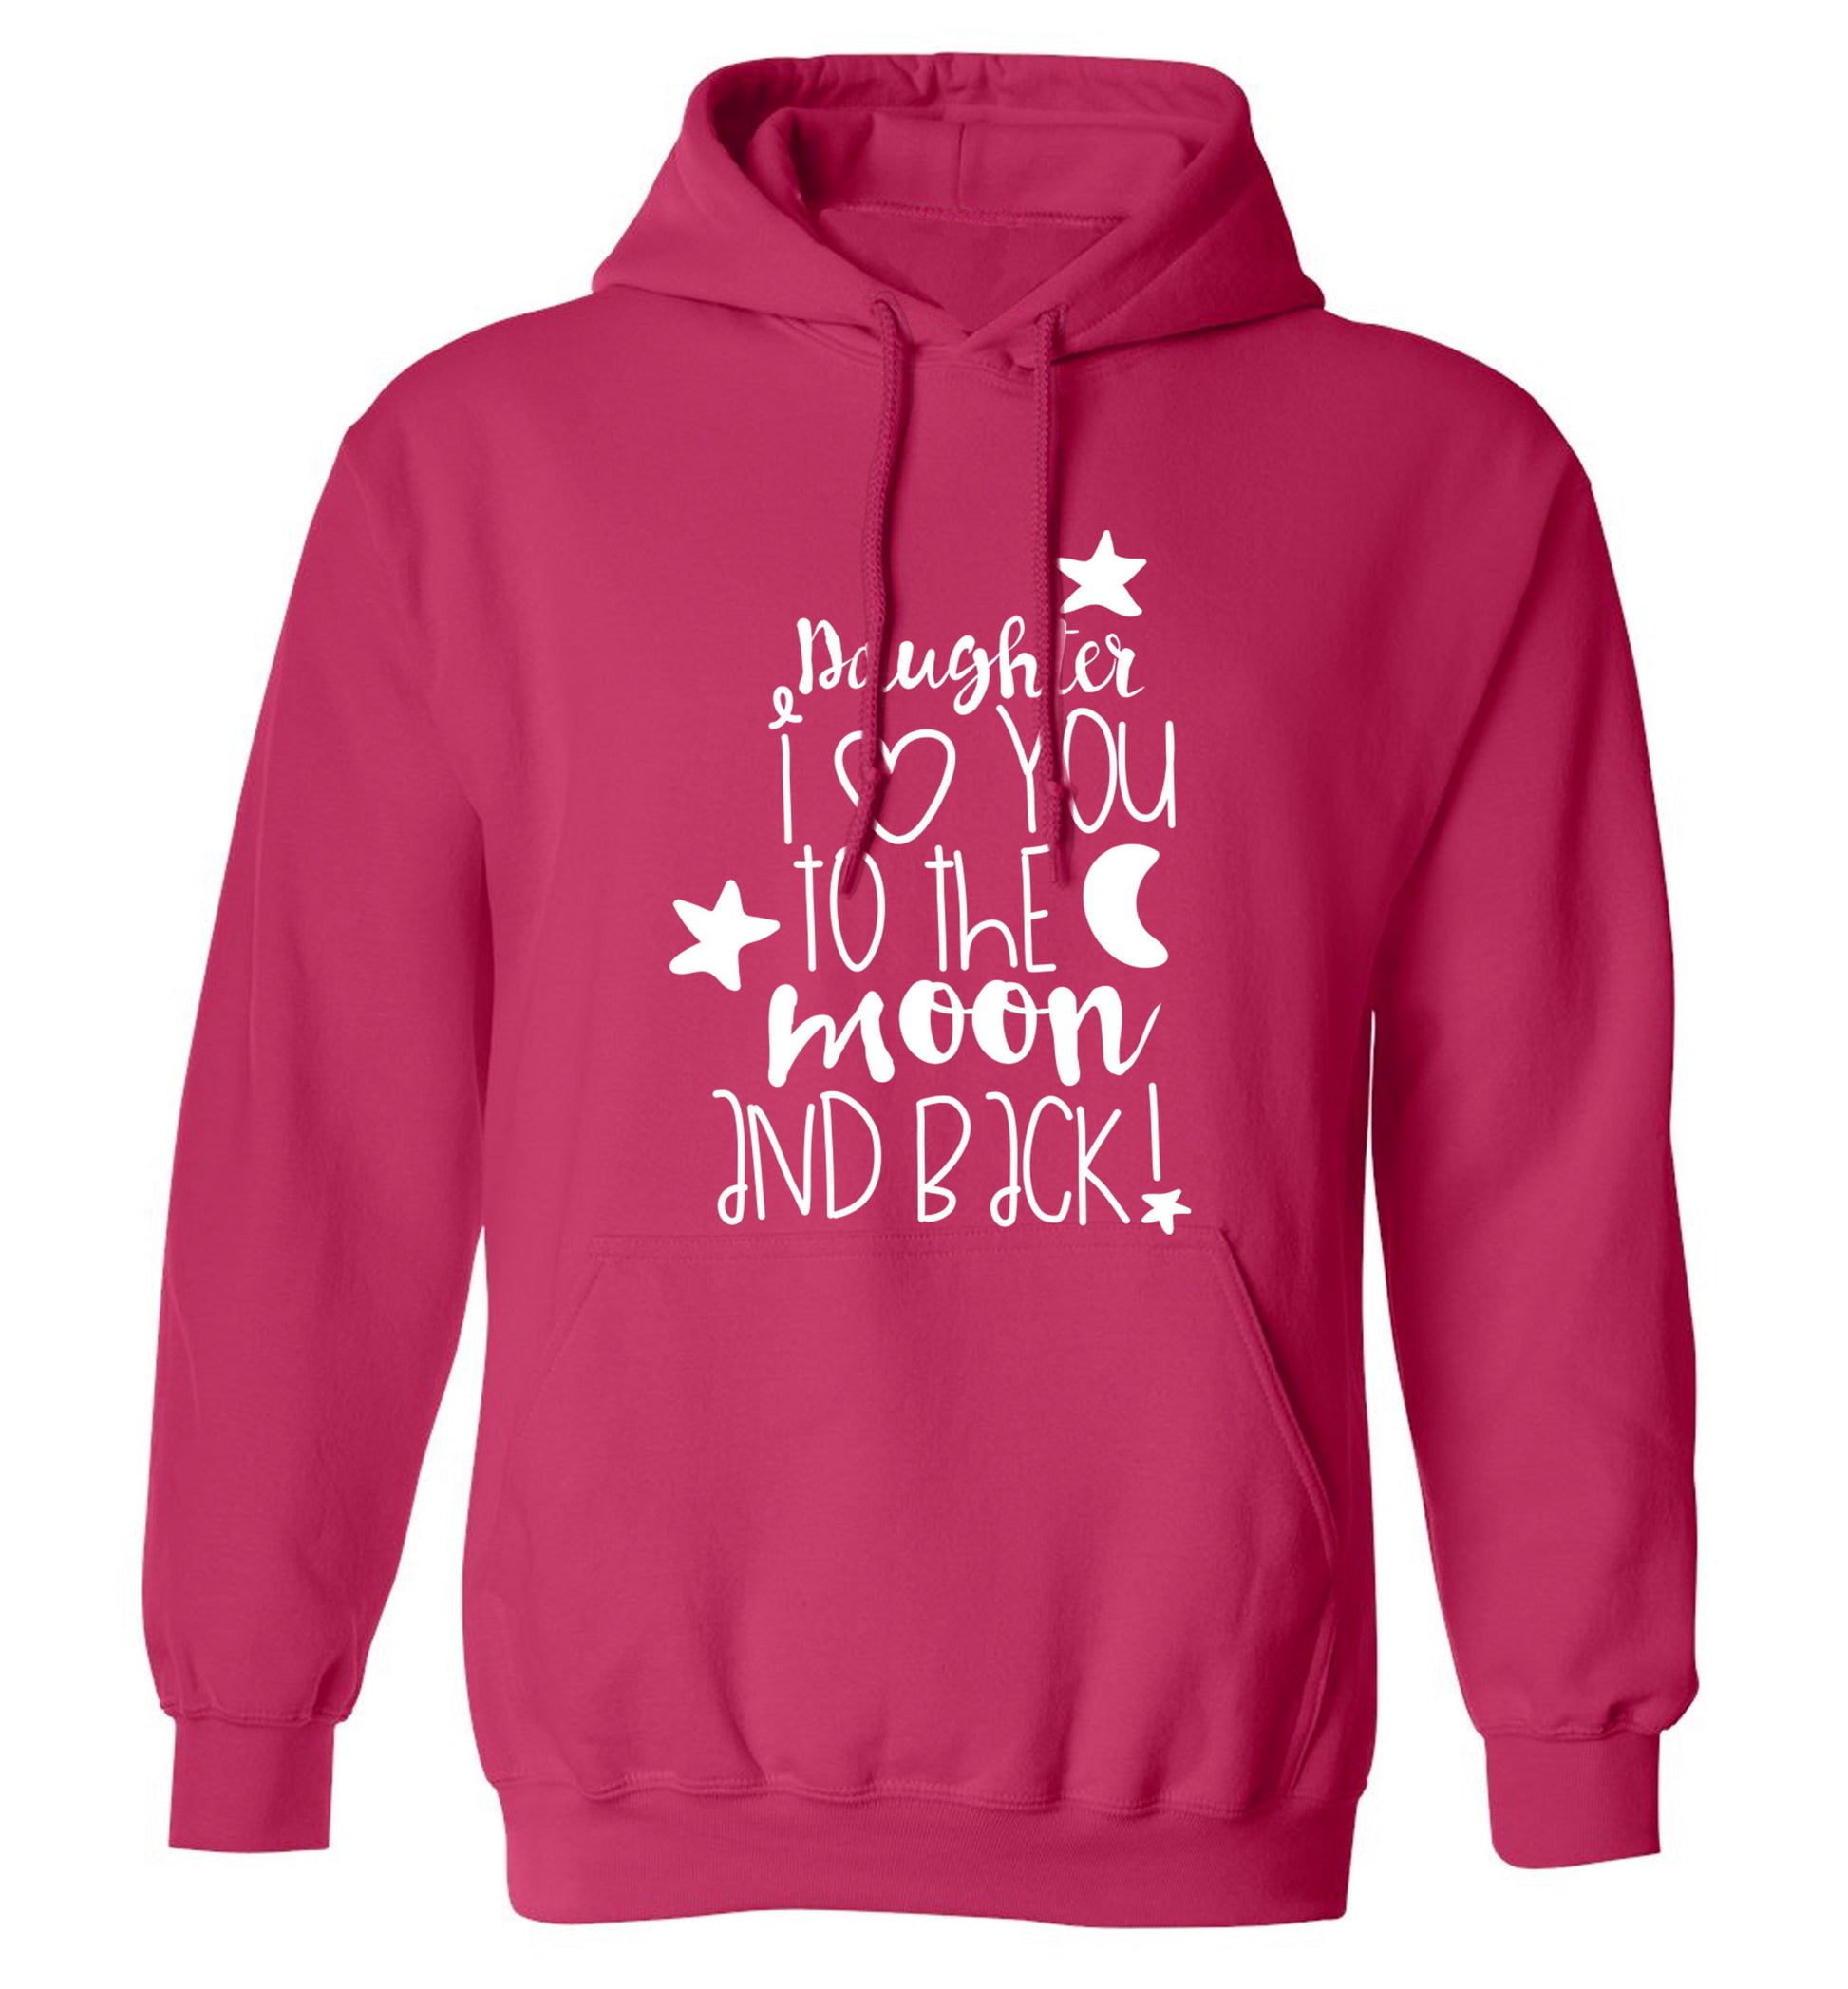 Daughter I love you to the moon and back adults unisex pink hoodie 2XL